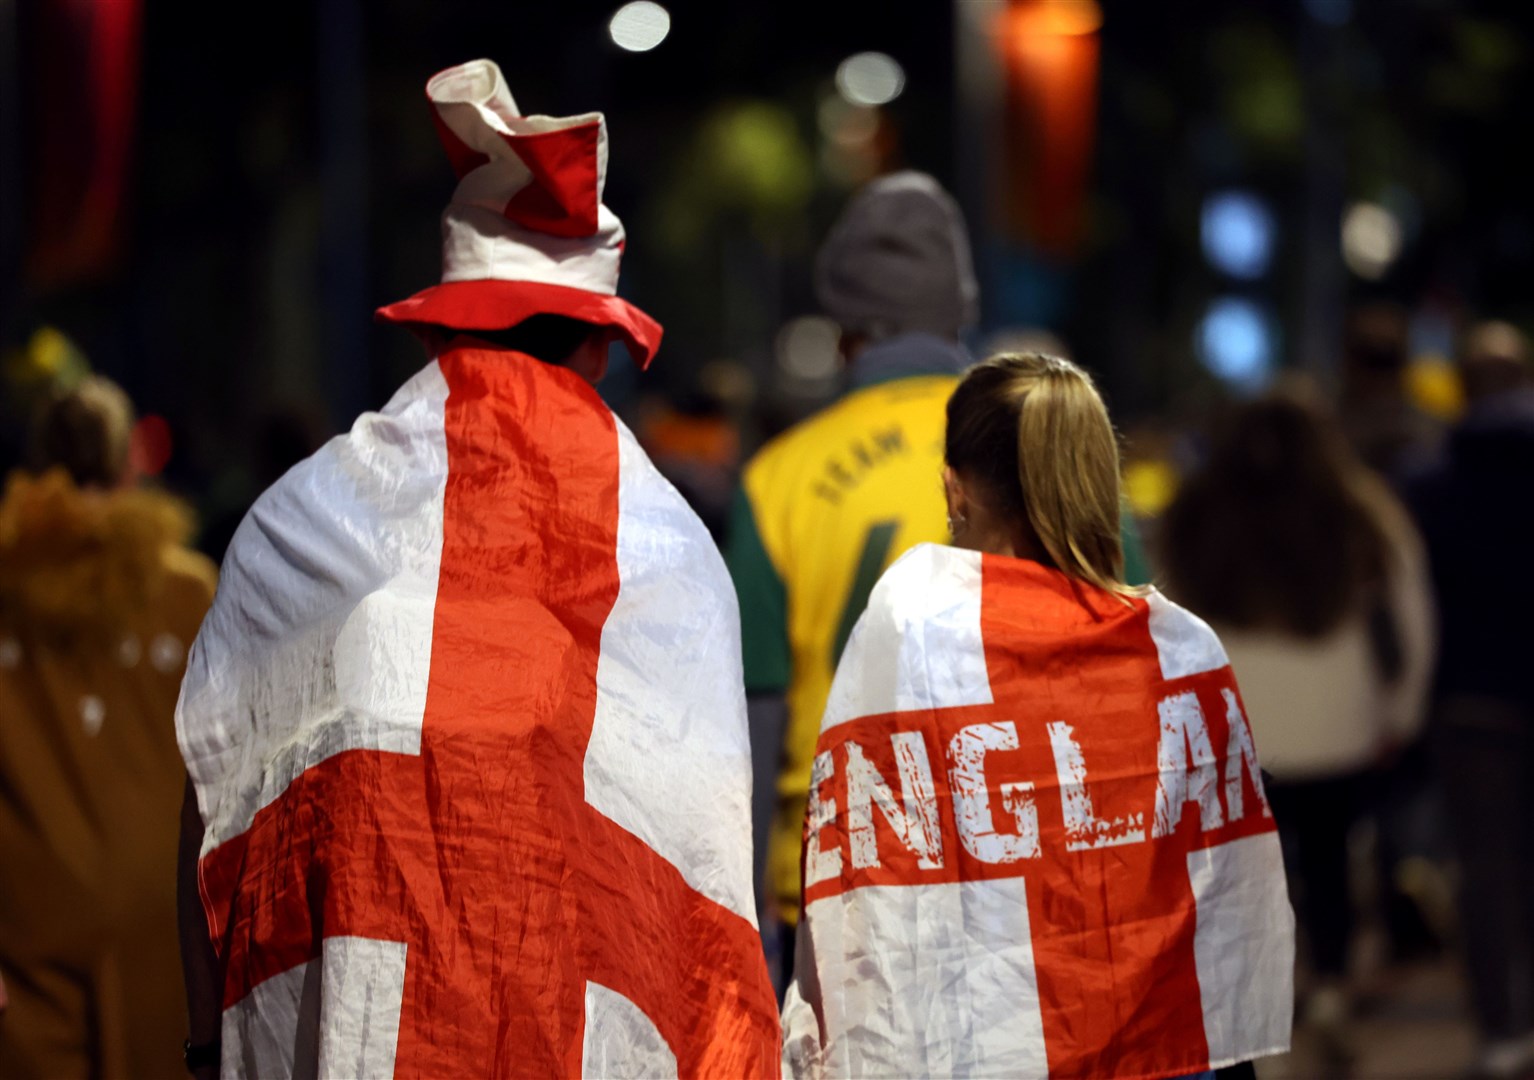 England fans outside the stadium in Sydney ahead of the World Cup semi-final against England (Isabel Infantes/PA)